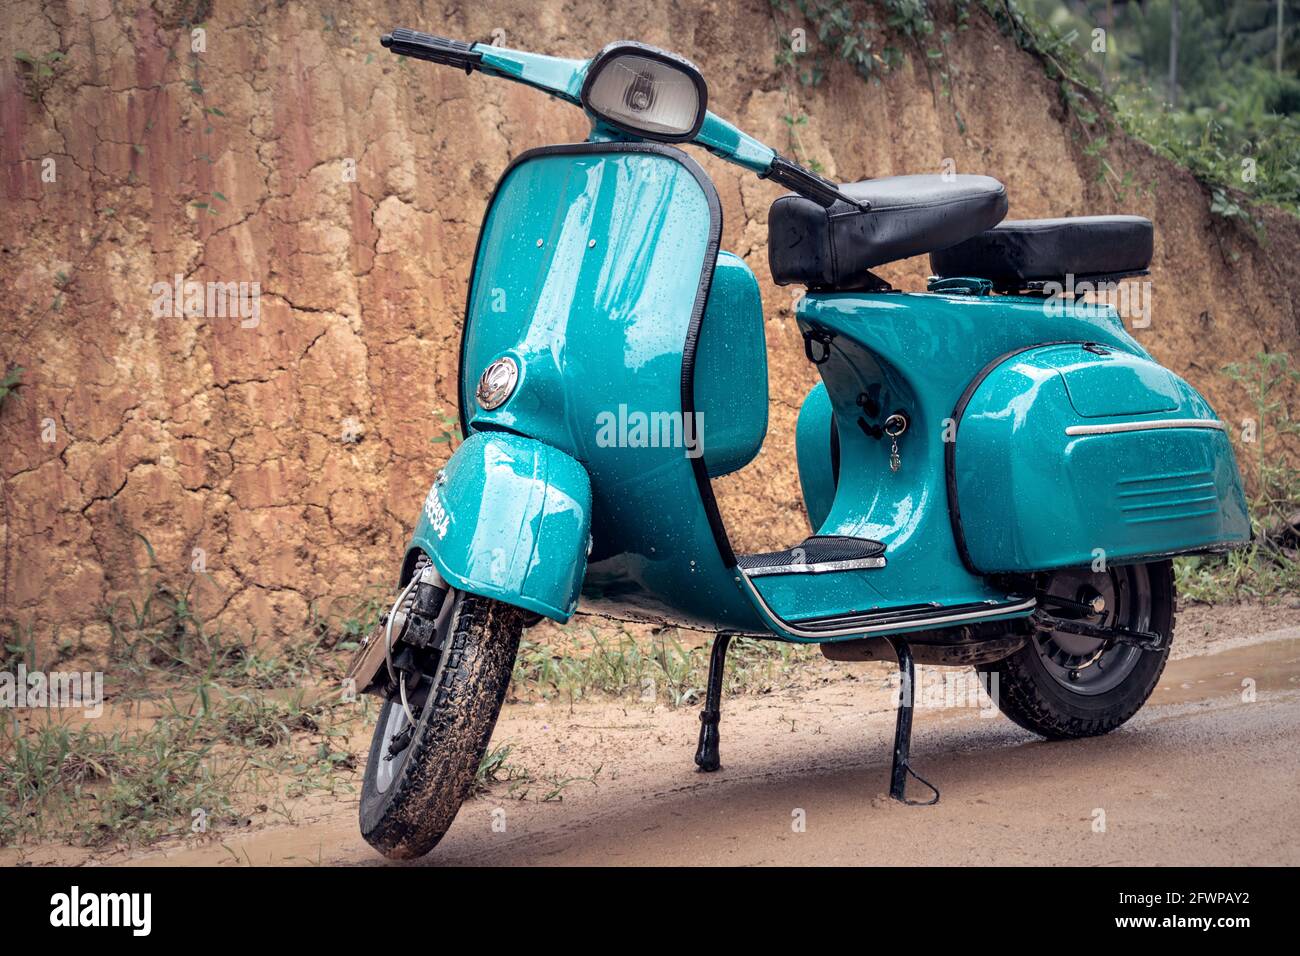 Vespa Scooter front view, parked in a muddy road on a rainy day. Sky blue vintage classic motorbike. Stock Photo